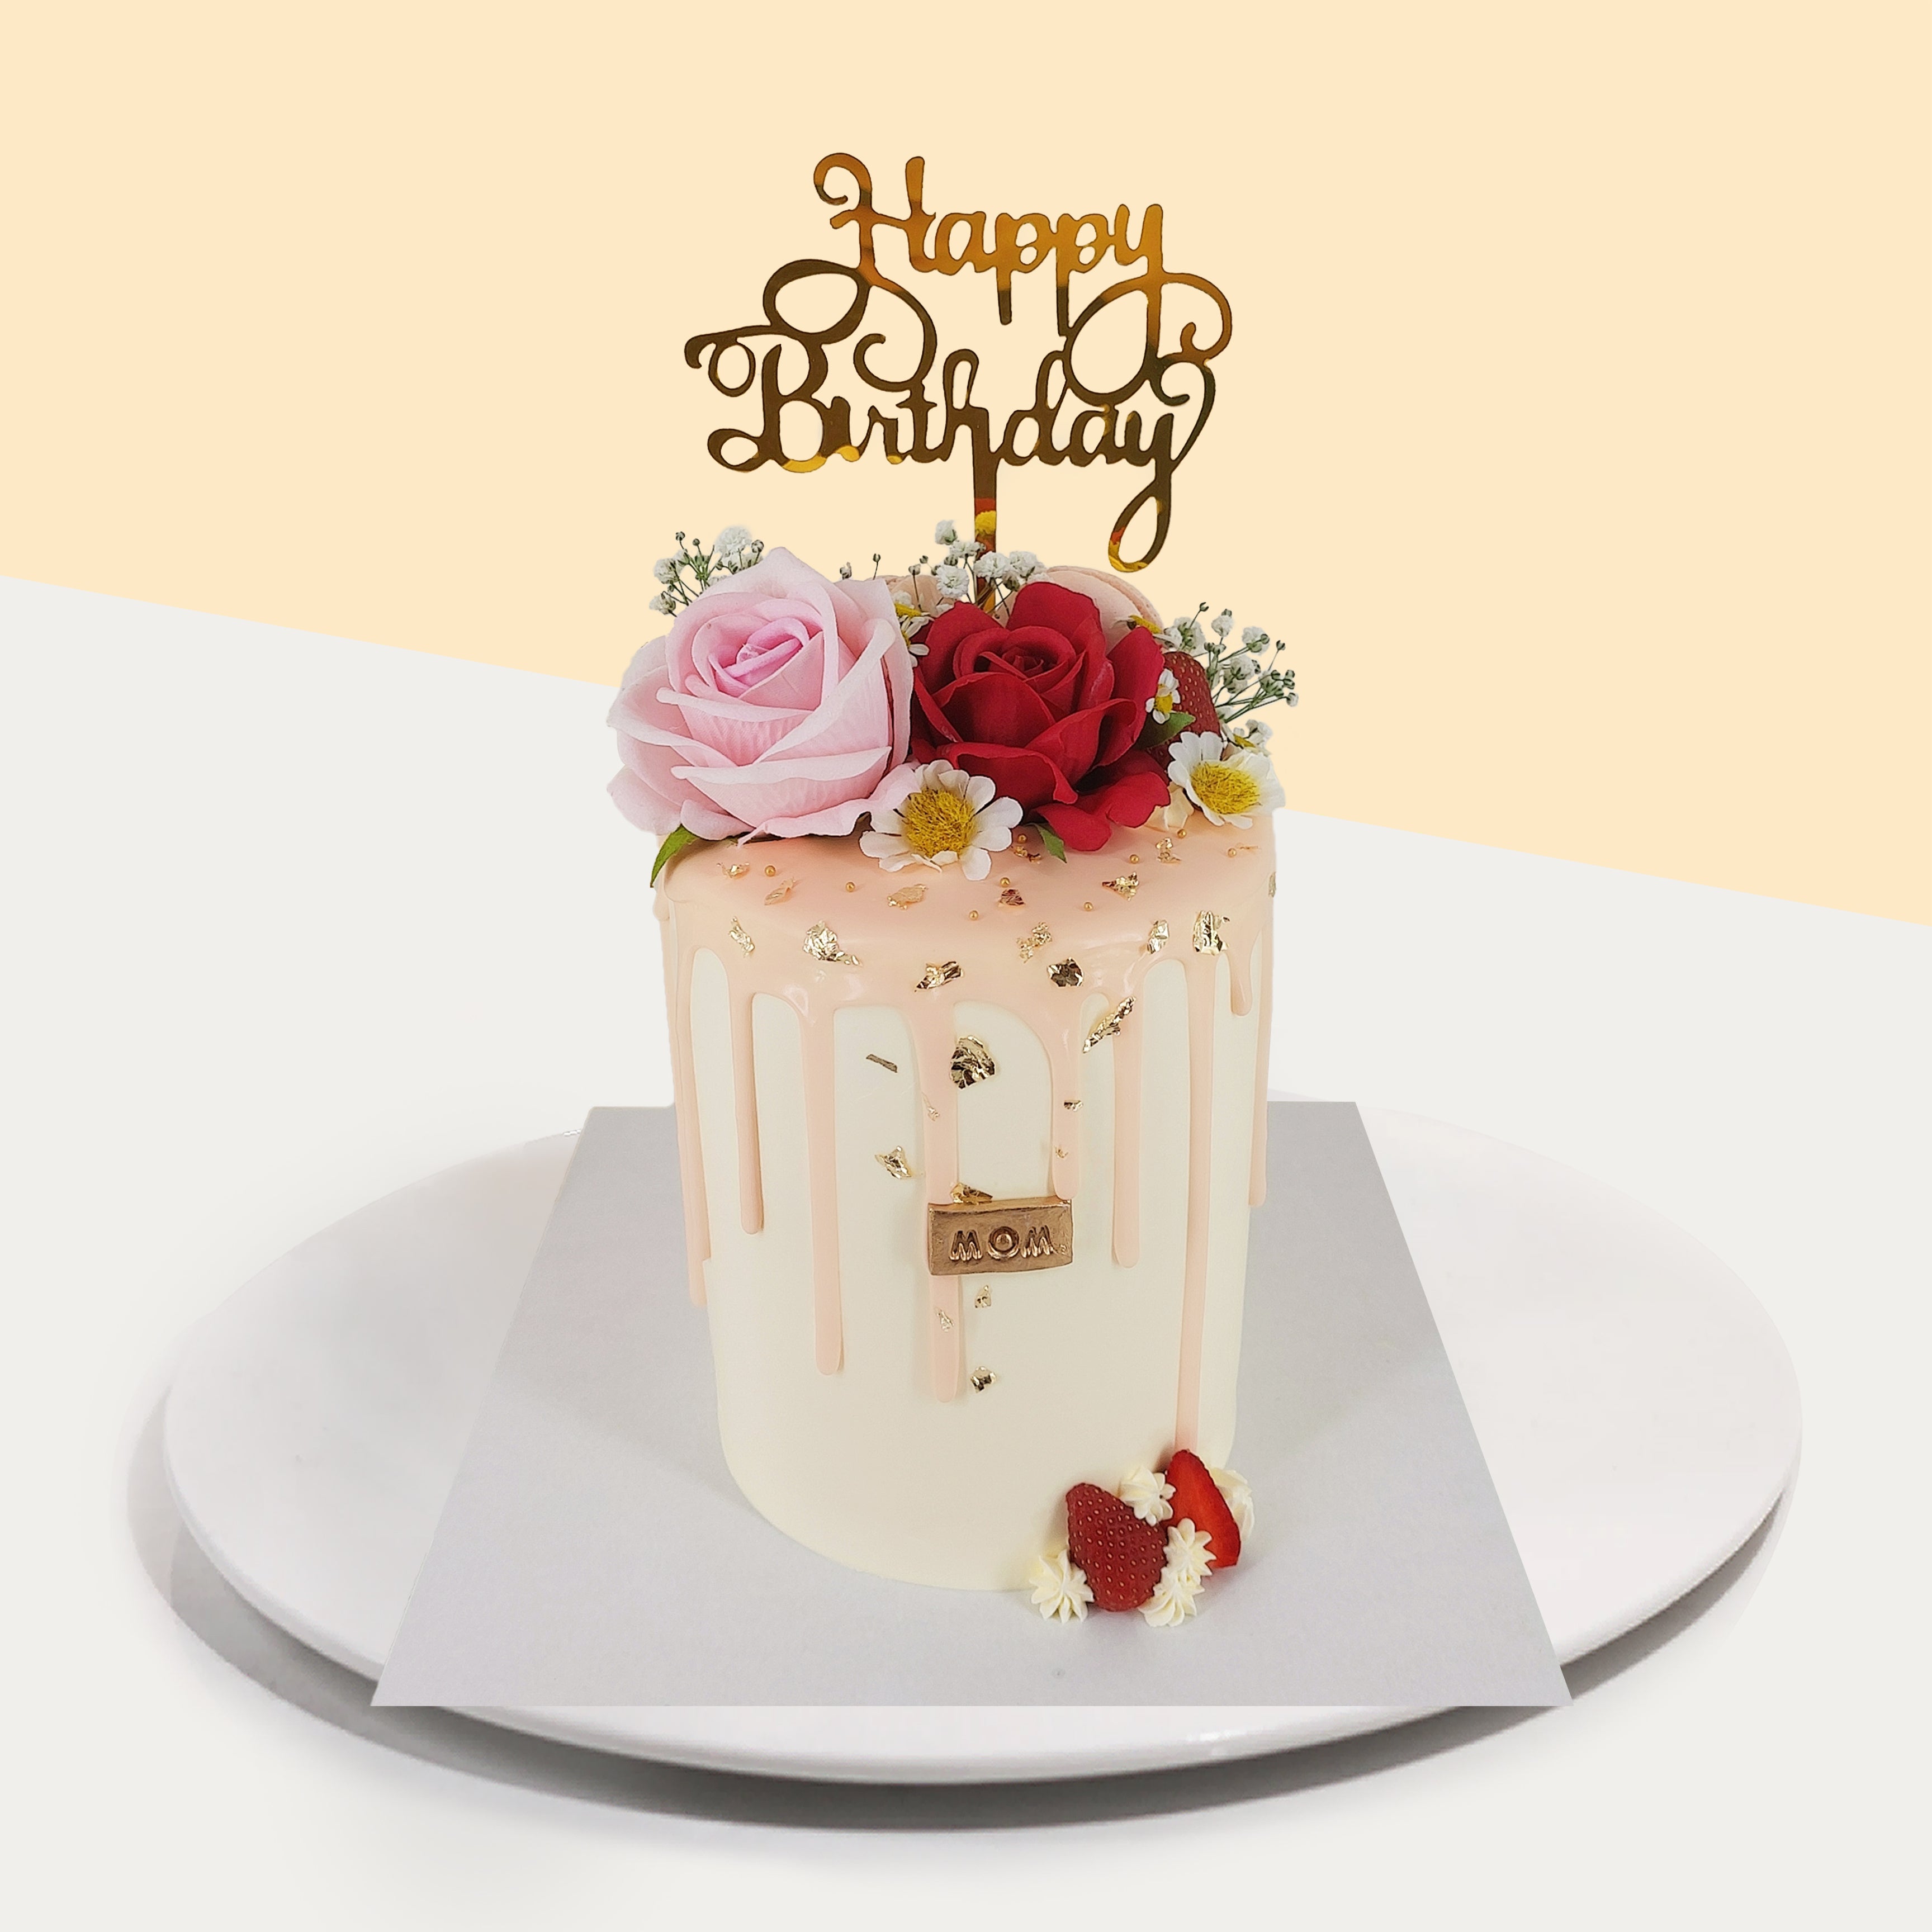 White Forest Love Heart Cake for Kathmandu Valley - Cake delivery in Nepal  online | Gifts to Nepal | Giftmandu